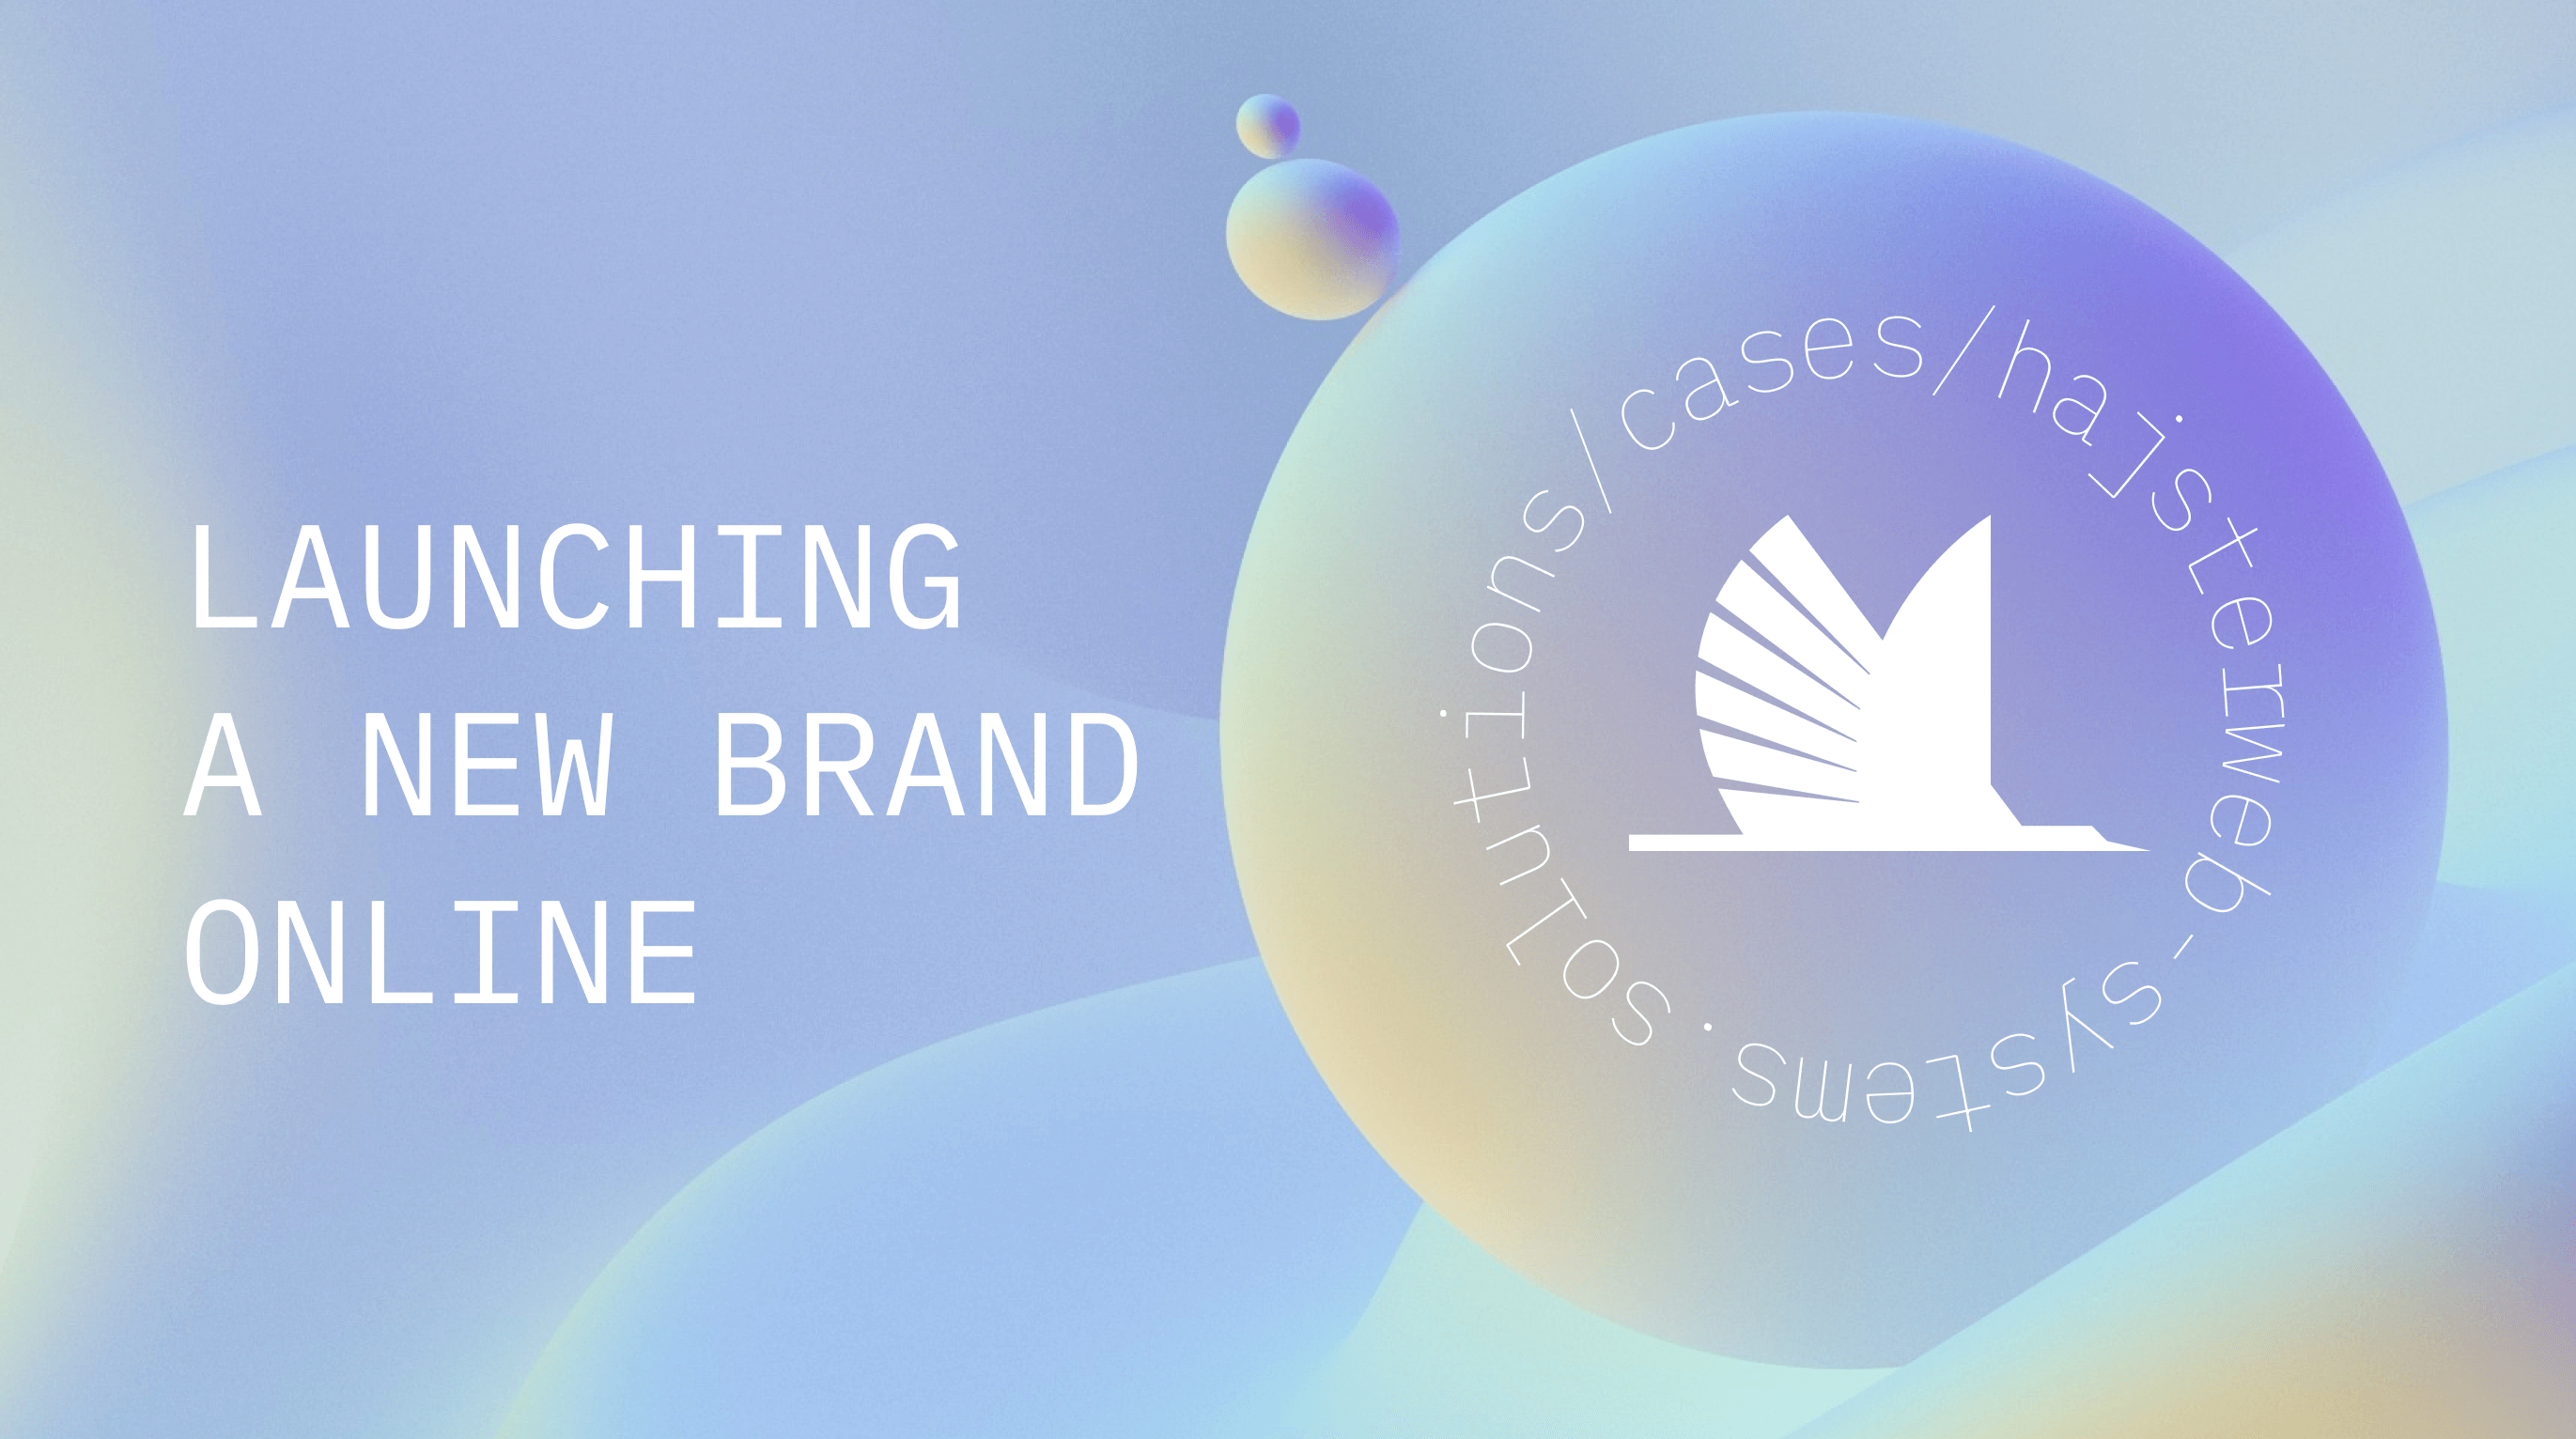 5 key steps to launch a new brand online